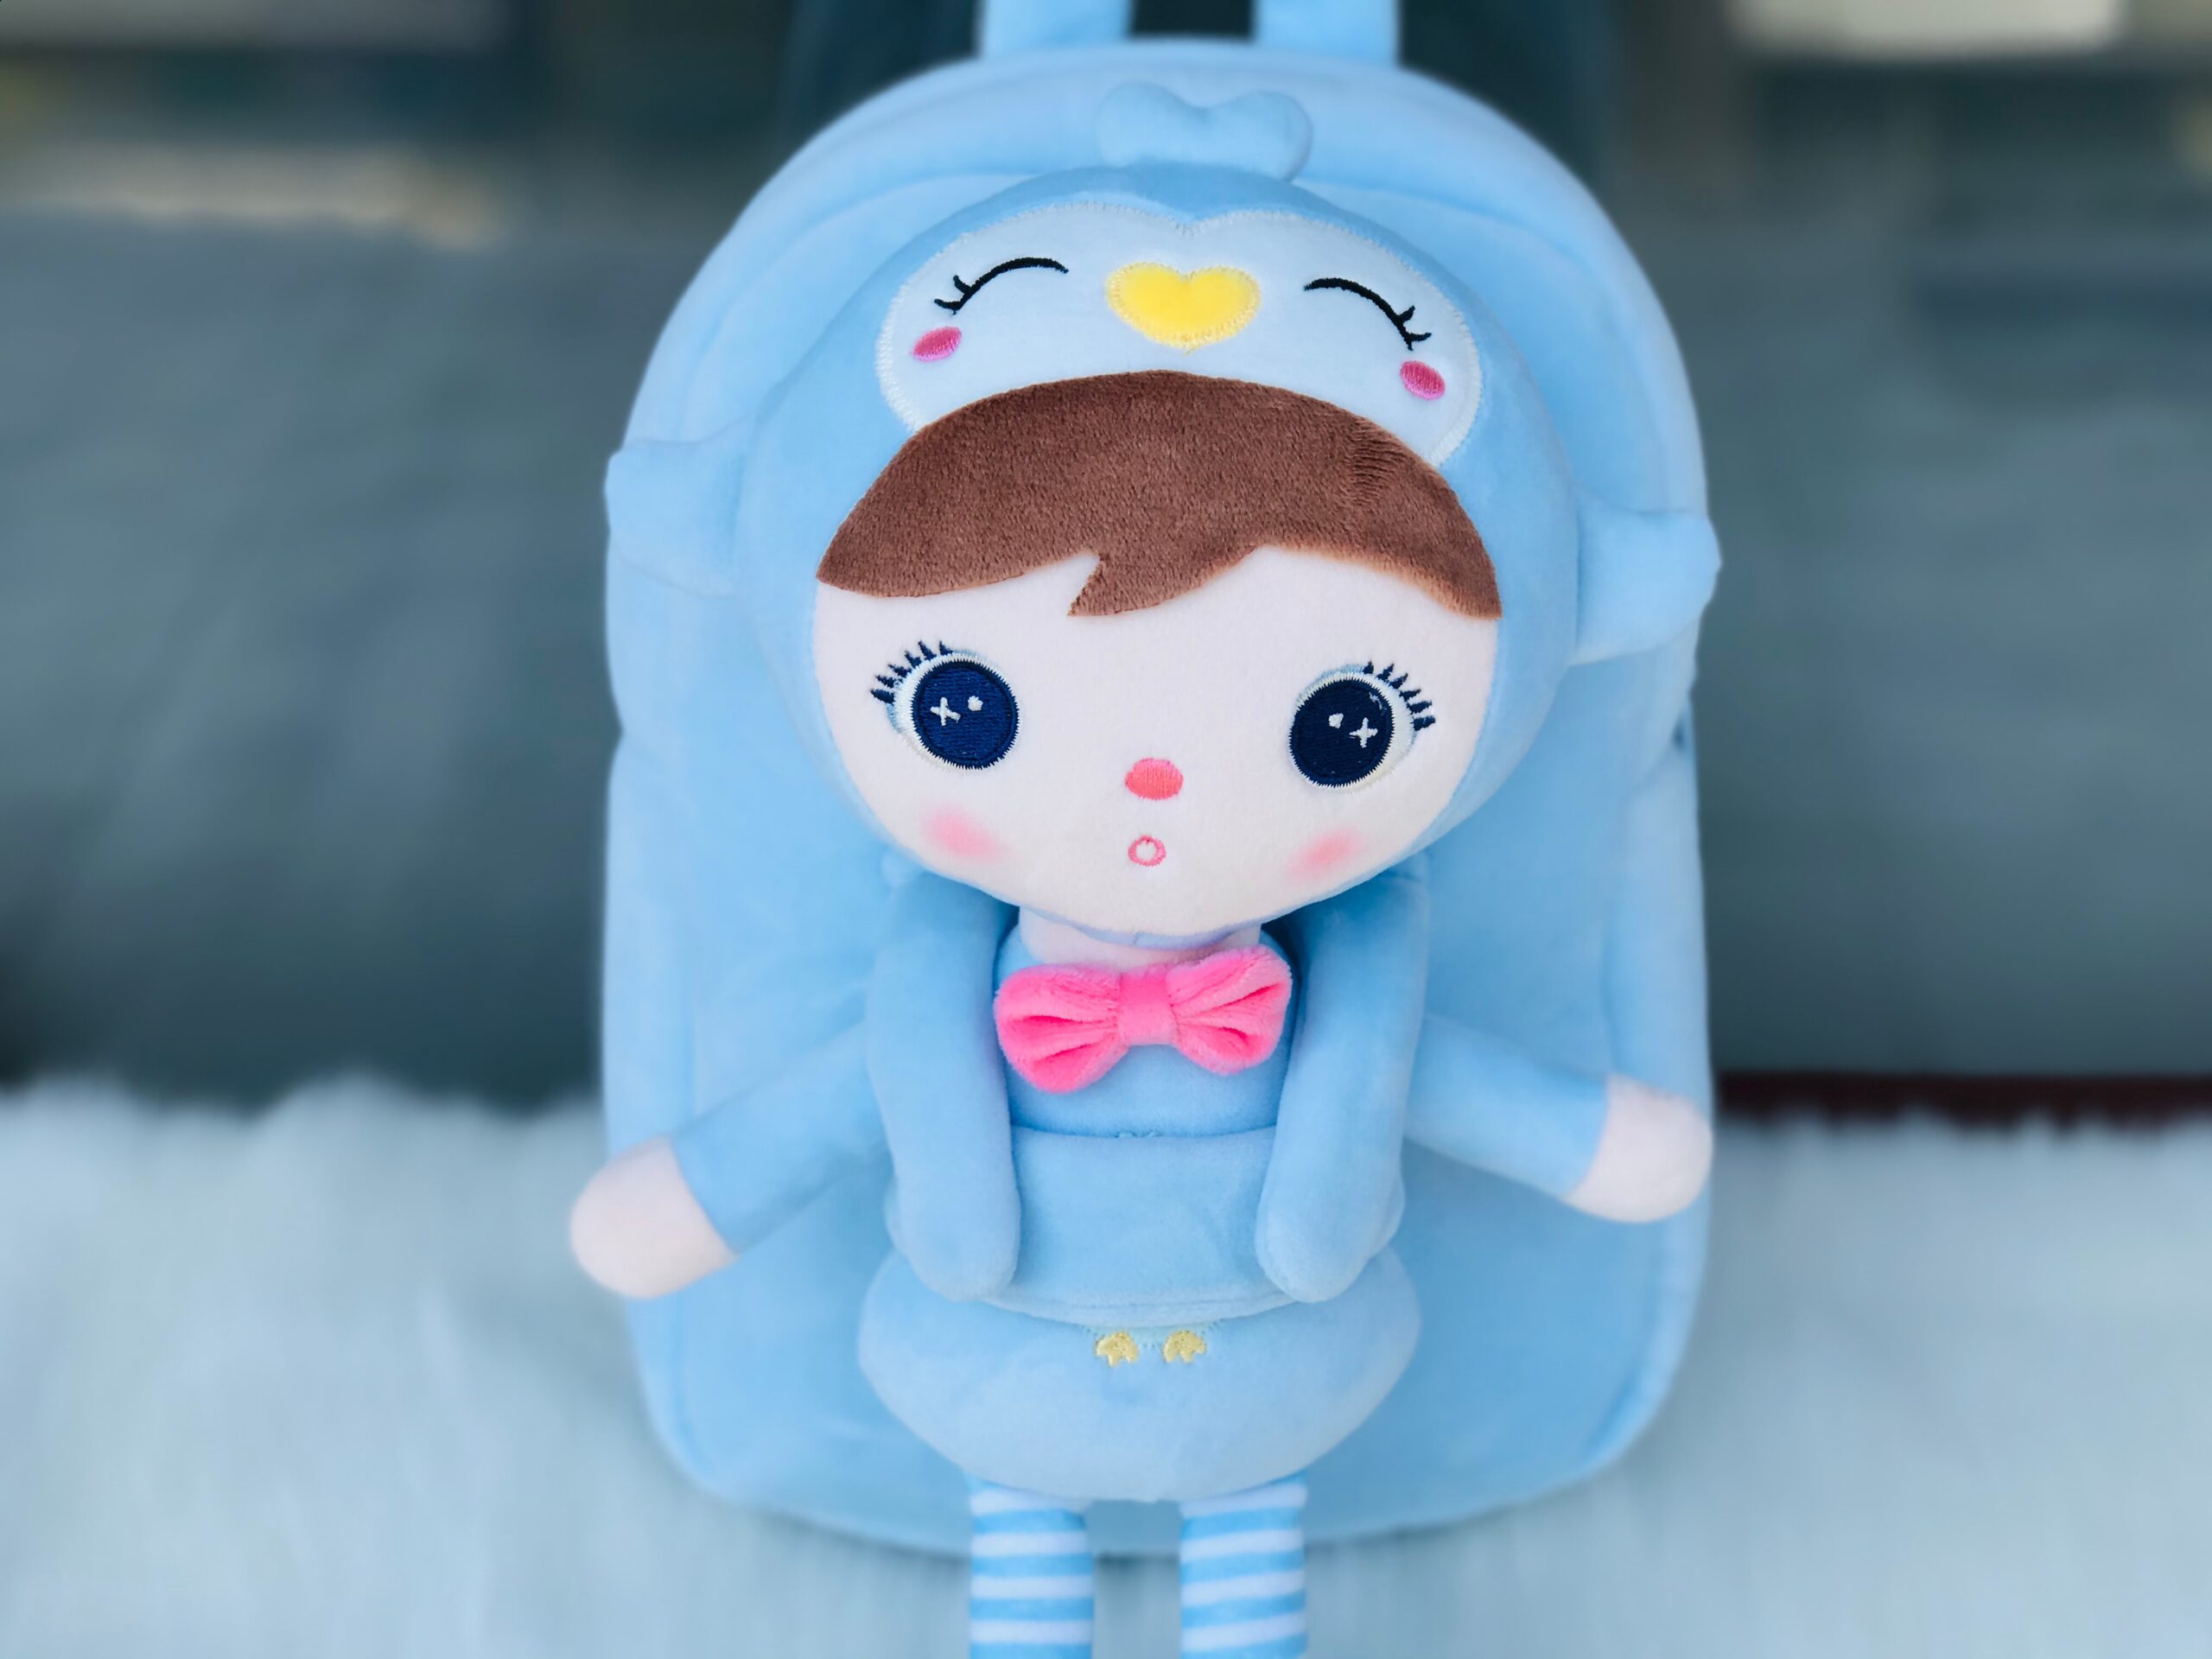 Gloveleya Plush Backpack Keppel Backpacks with dolls Animal Cartoon Bags Baby Gifts Plush Dolls Stuffed Toys for Children First